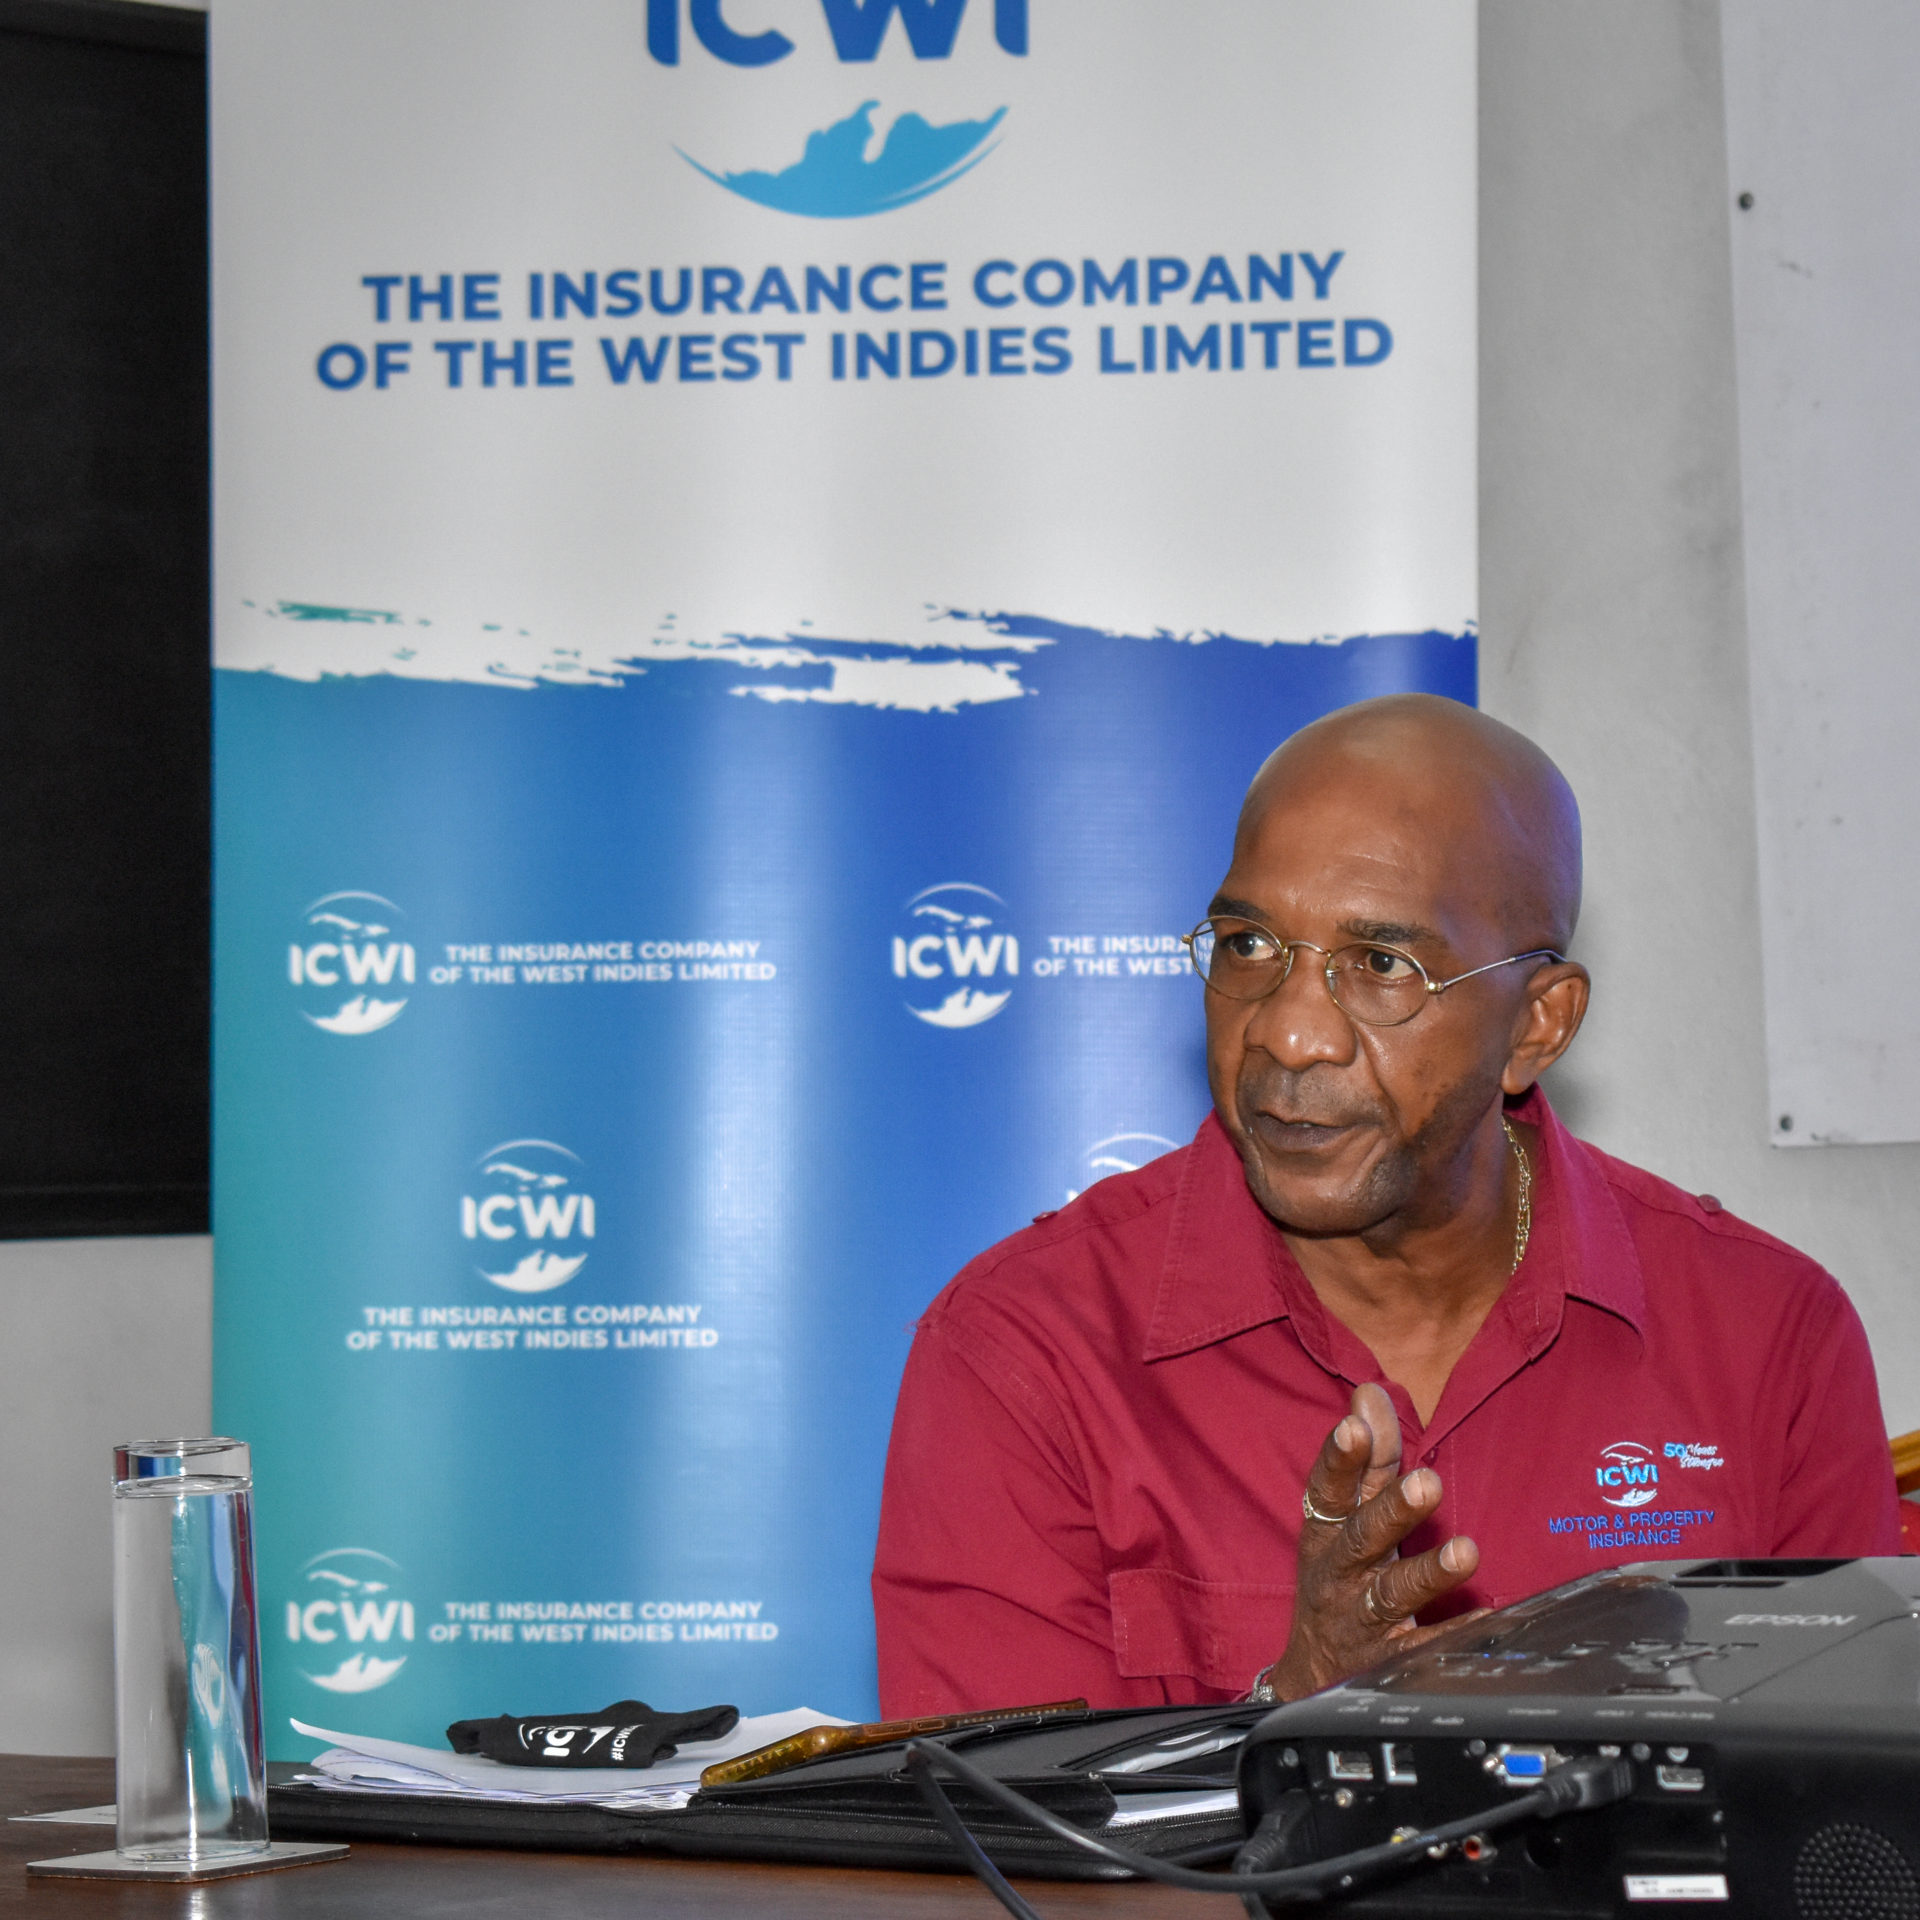 ICWI LAUNCHES ITS PREMIER POLICY IN DOMINICA